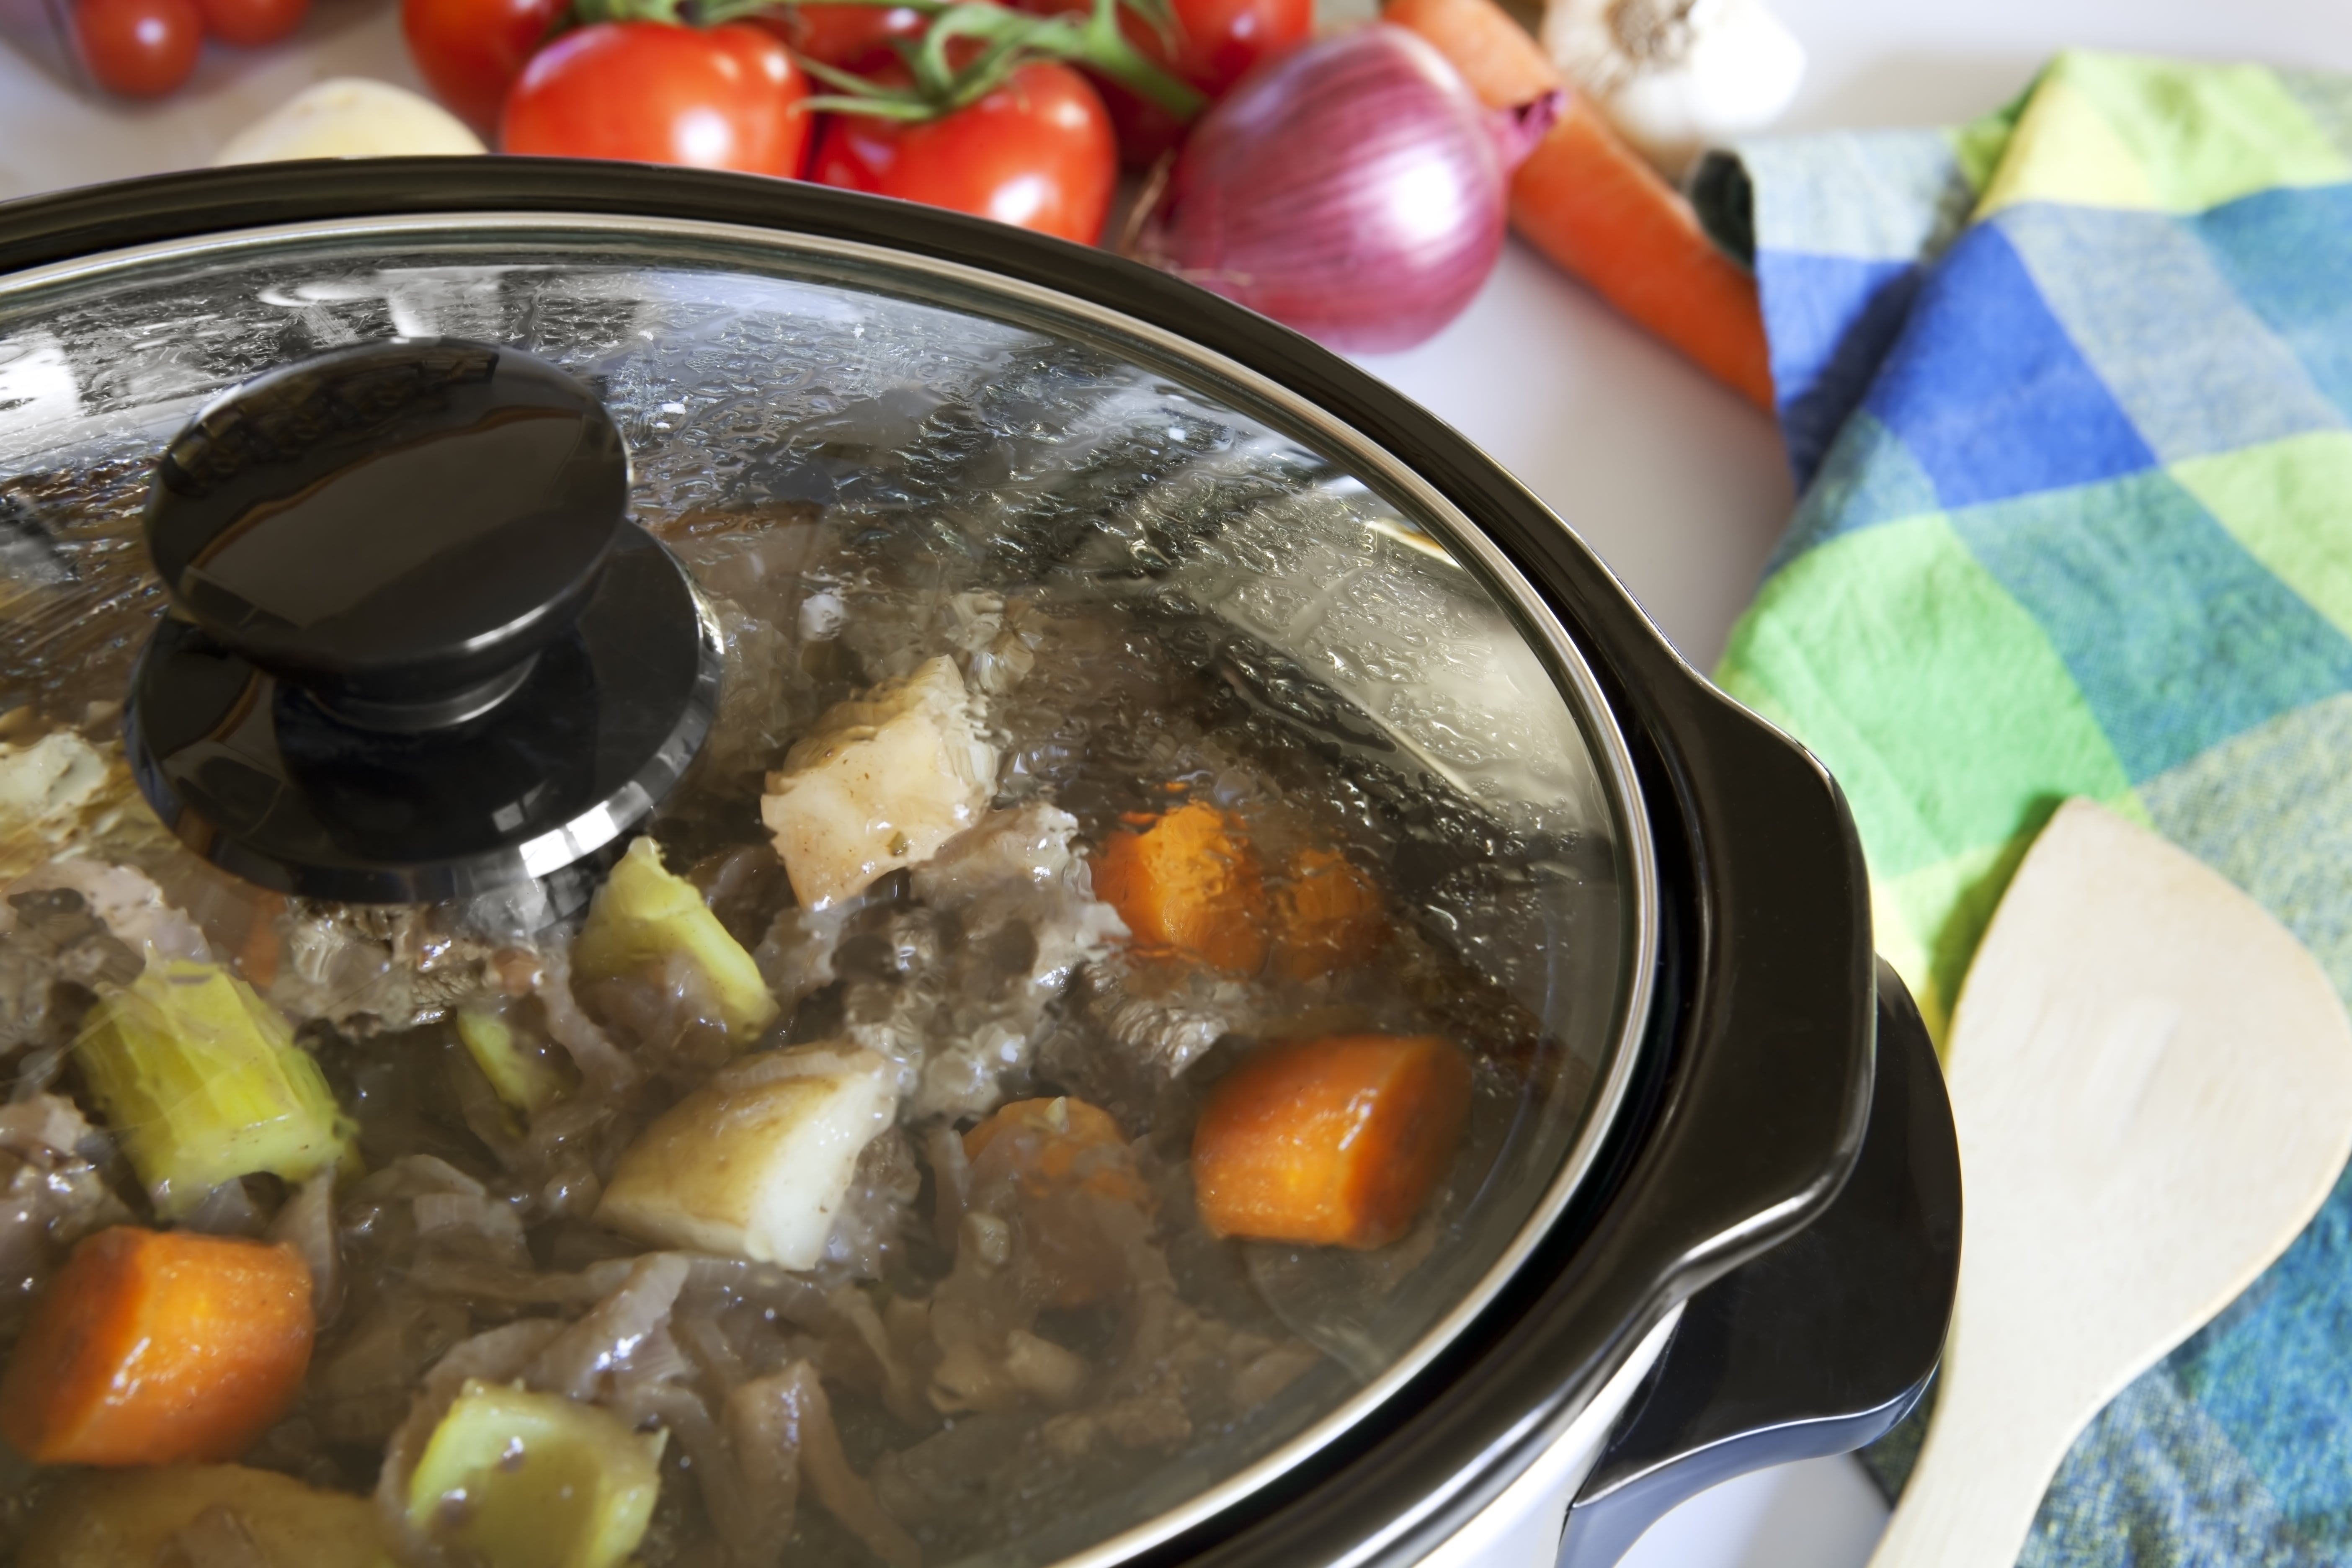 Top gifts for a Crock Pot lover